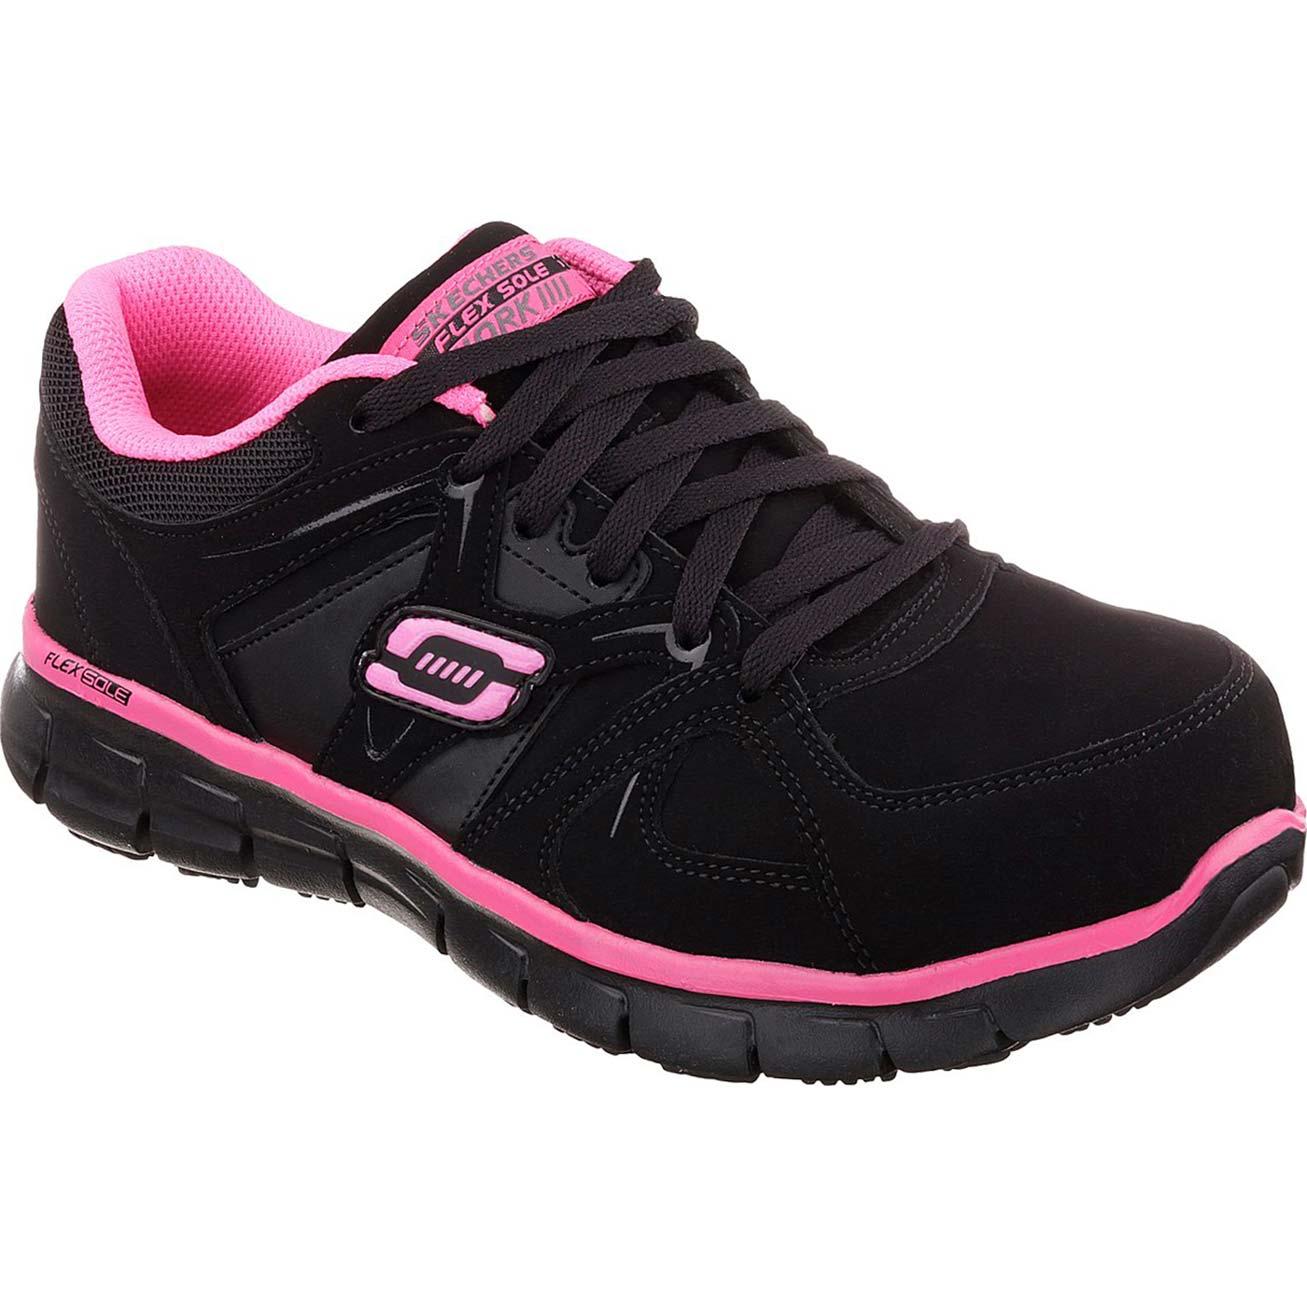 skechers safety toe work shoes Sale,up 